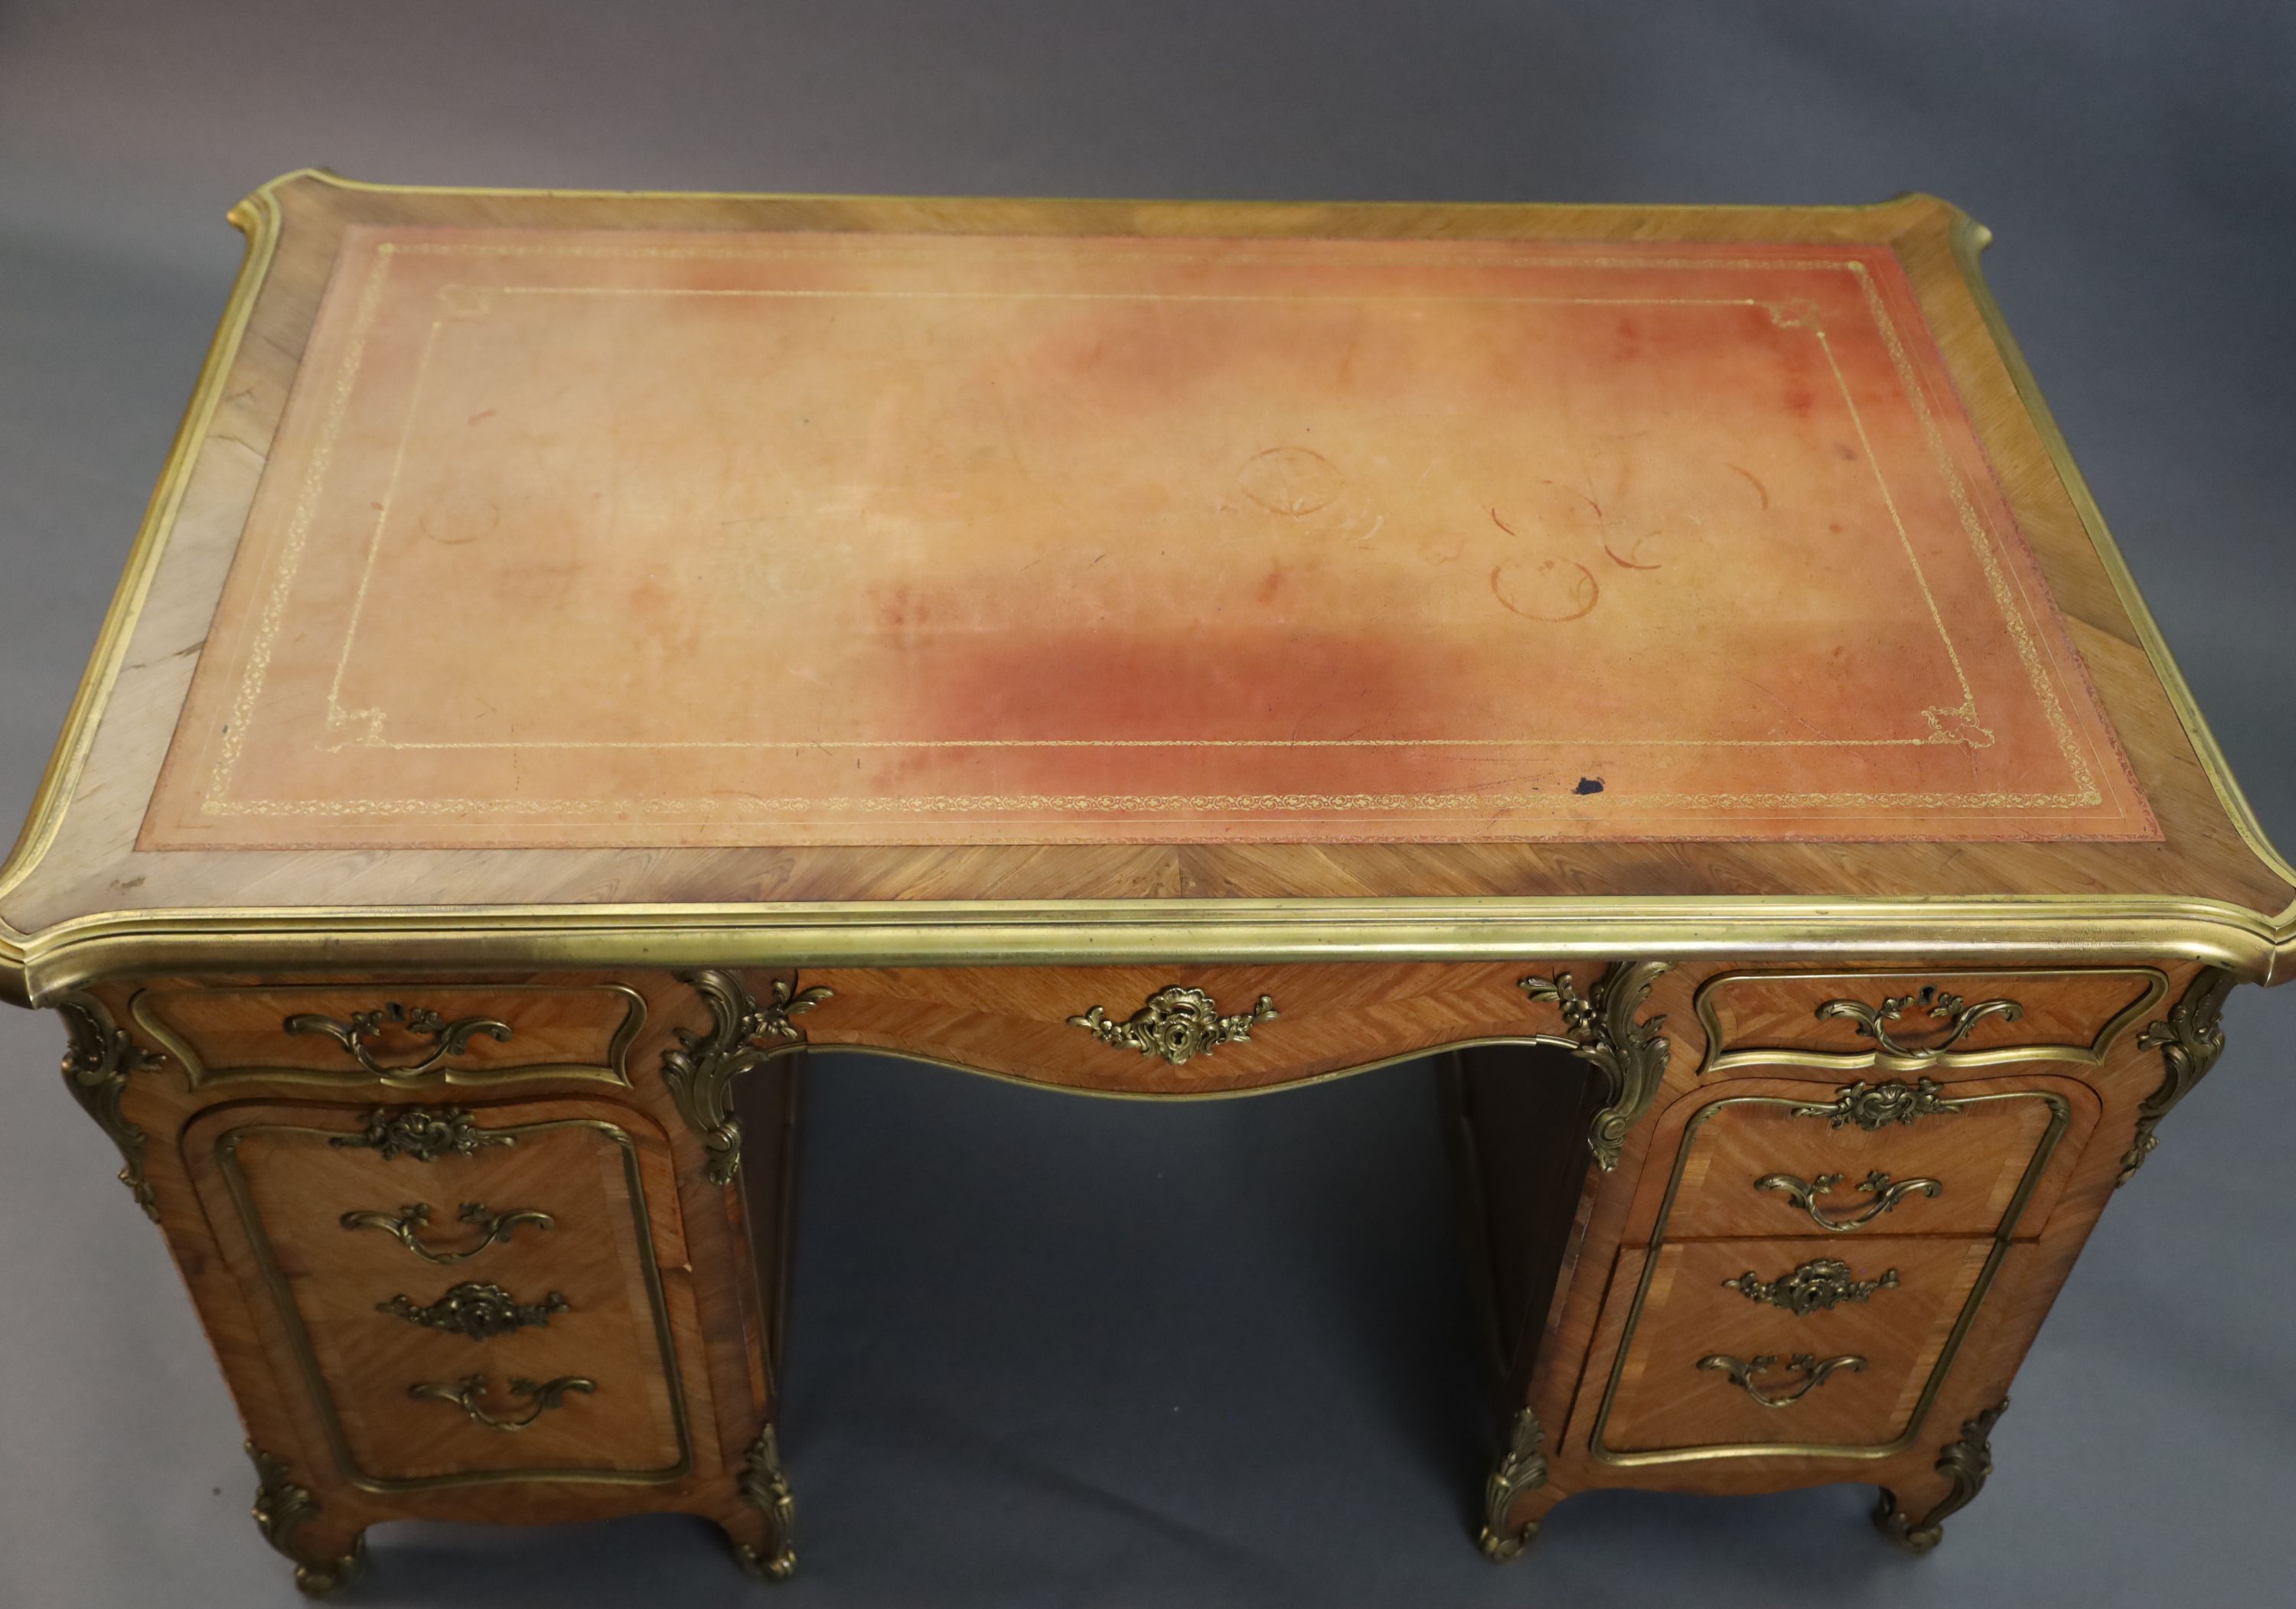 An early 20th century Louis XVI style ormolu mounted satinwood and rosewood kneehole desk, W.4ft 5in. D.2ft 8in. H.2ft 6in.